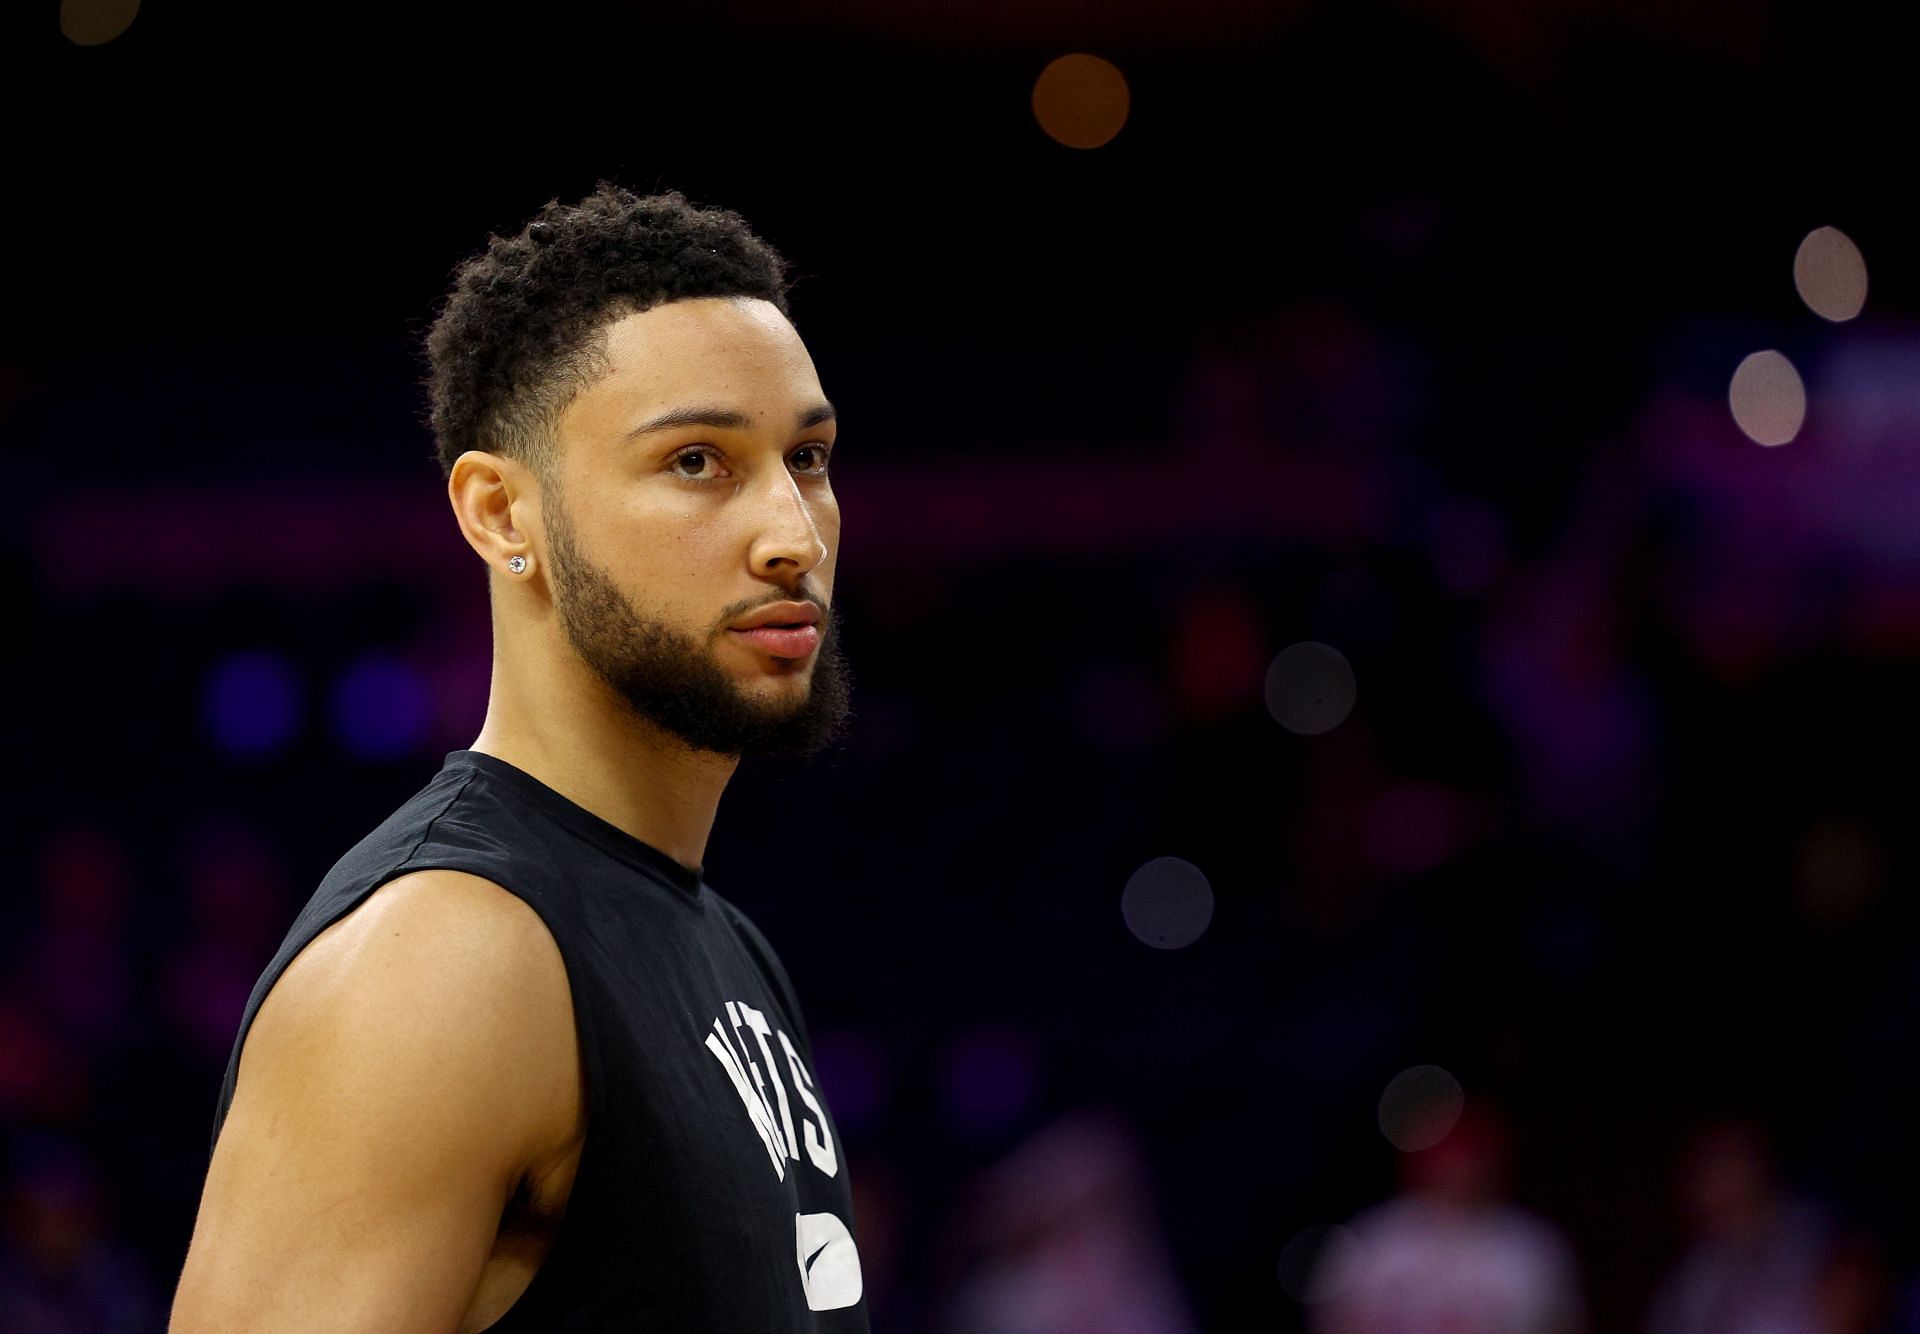 It's a responsibility; it's like you're given a lot of responsibility to  take care of the ball” - Ben Simmons explains the challenges as a point  guard in NBA, says passing comes